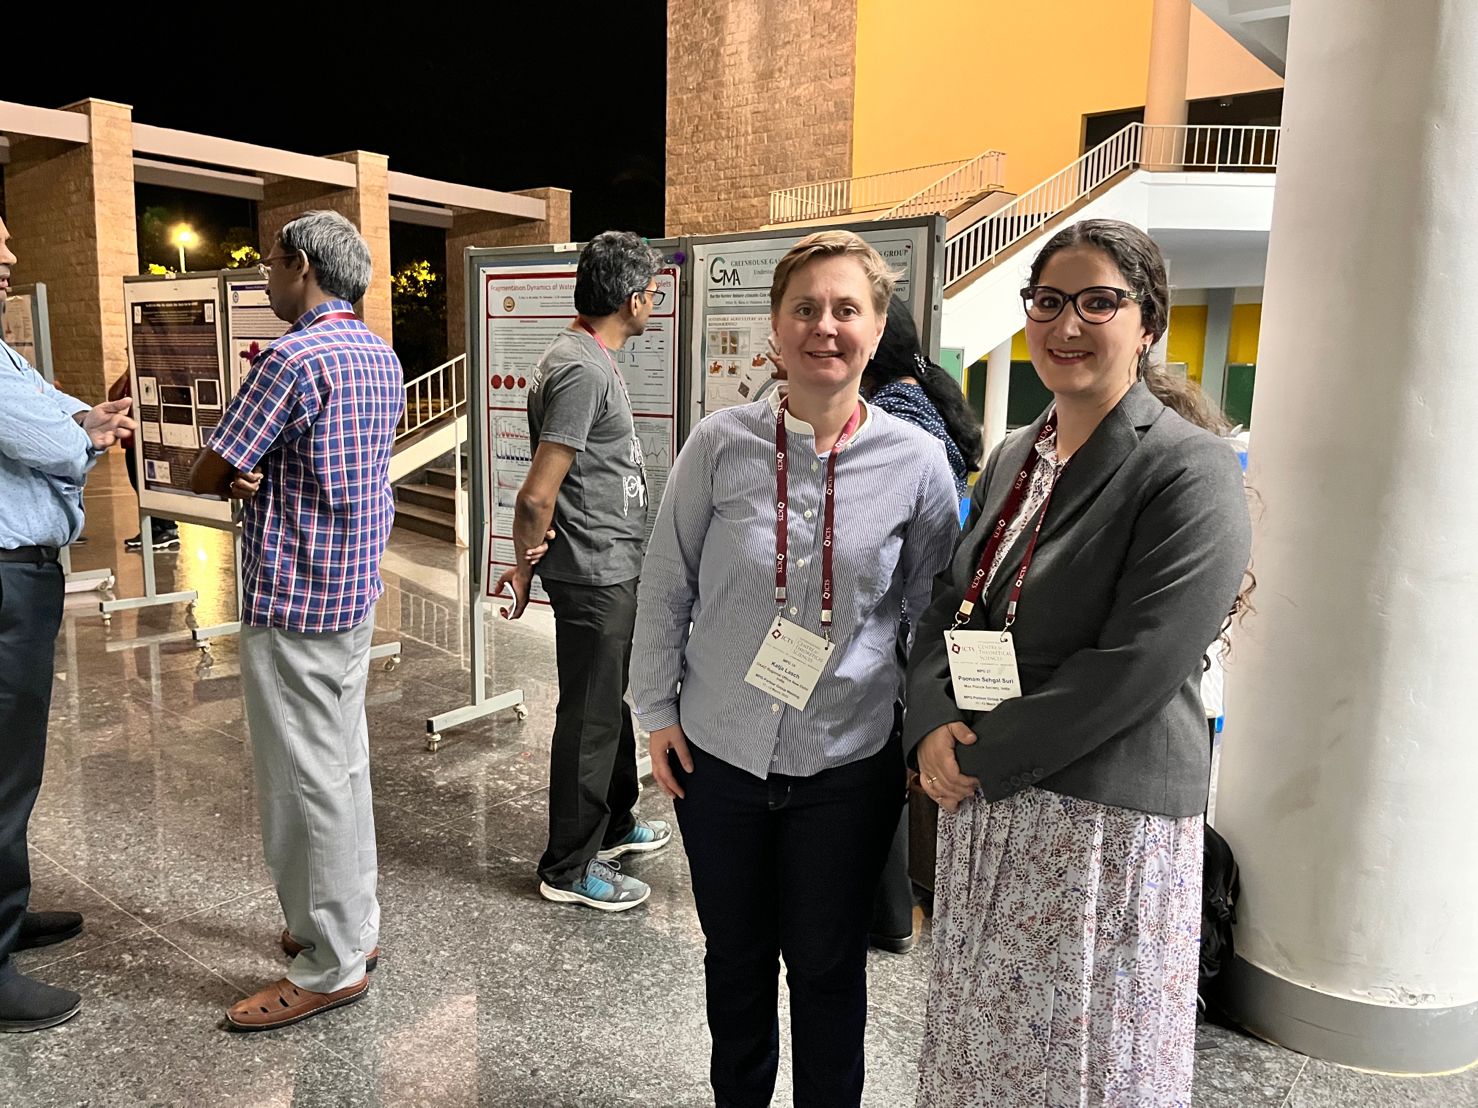 Poster Sessions at the Max Planck Partner Group Meeting, DAAD representative Dr. Katja Lasch and Max Planck representative Poonam Suri